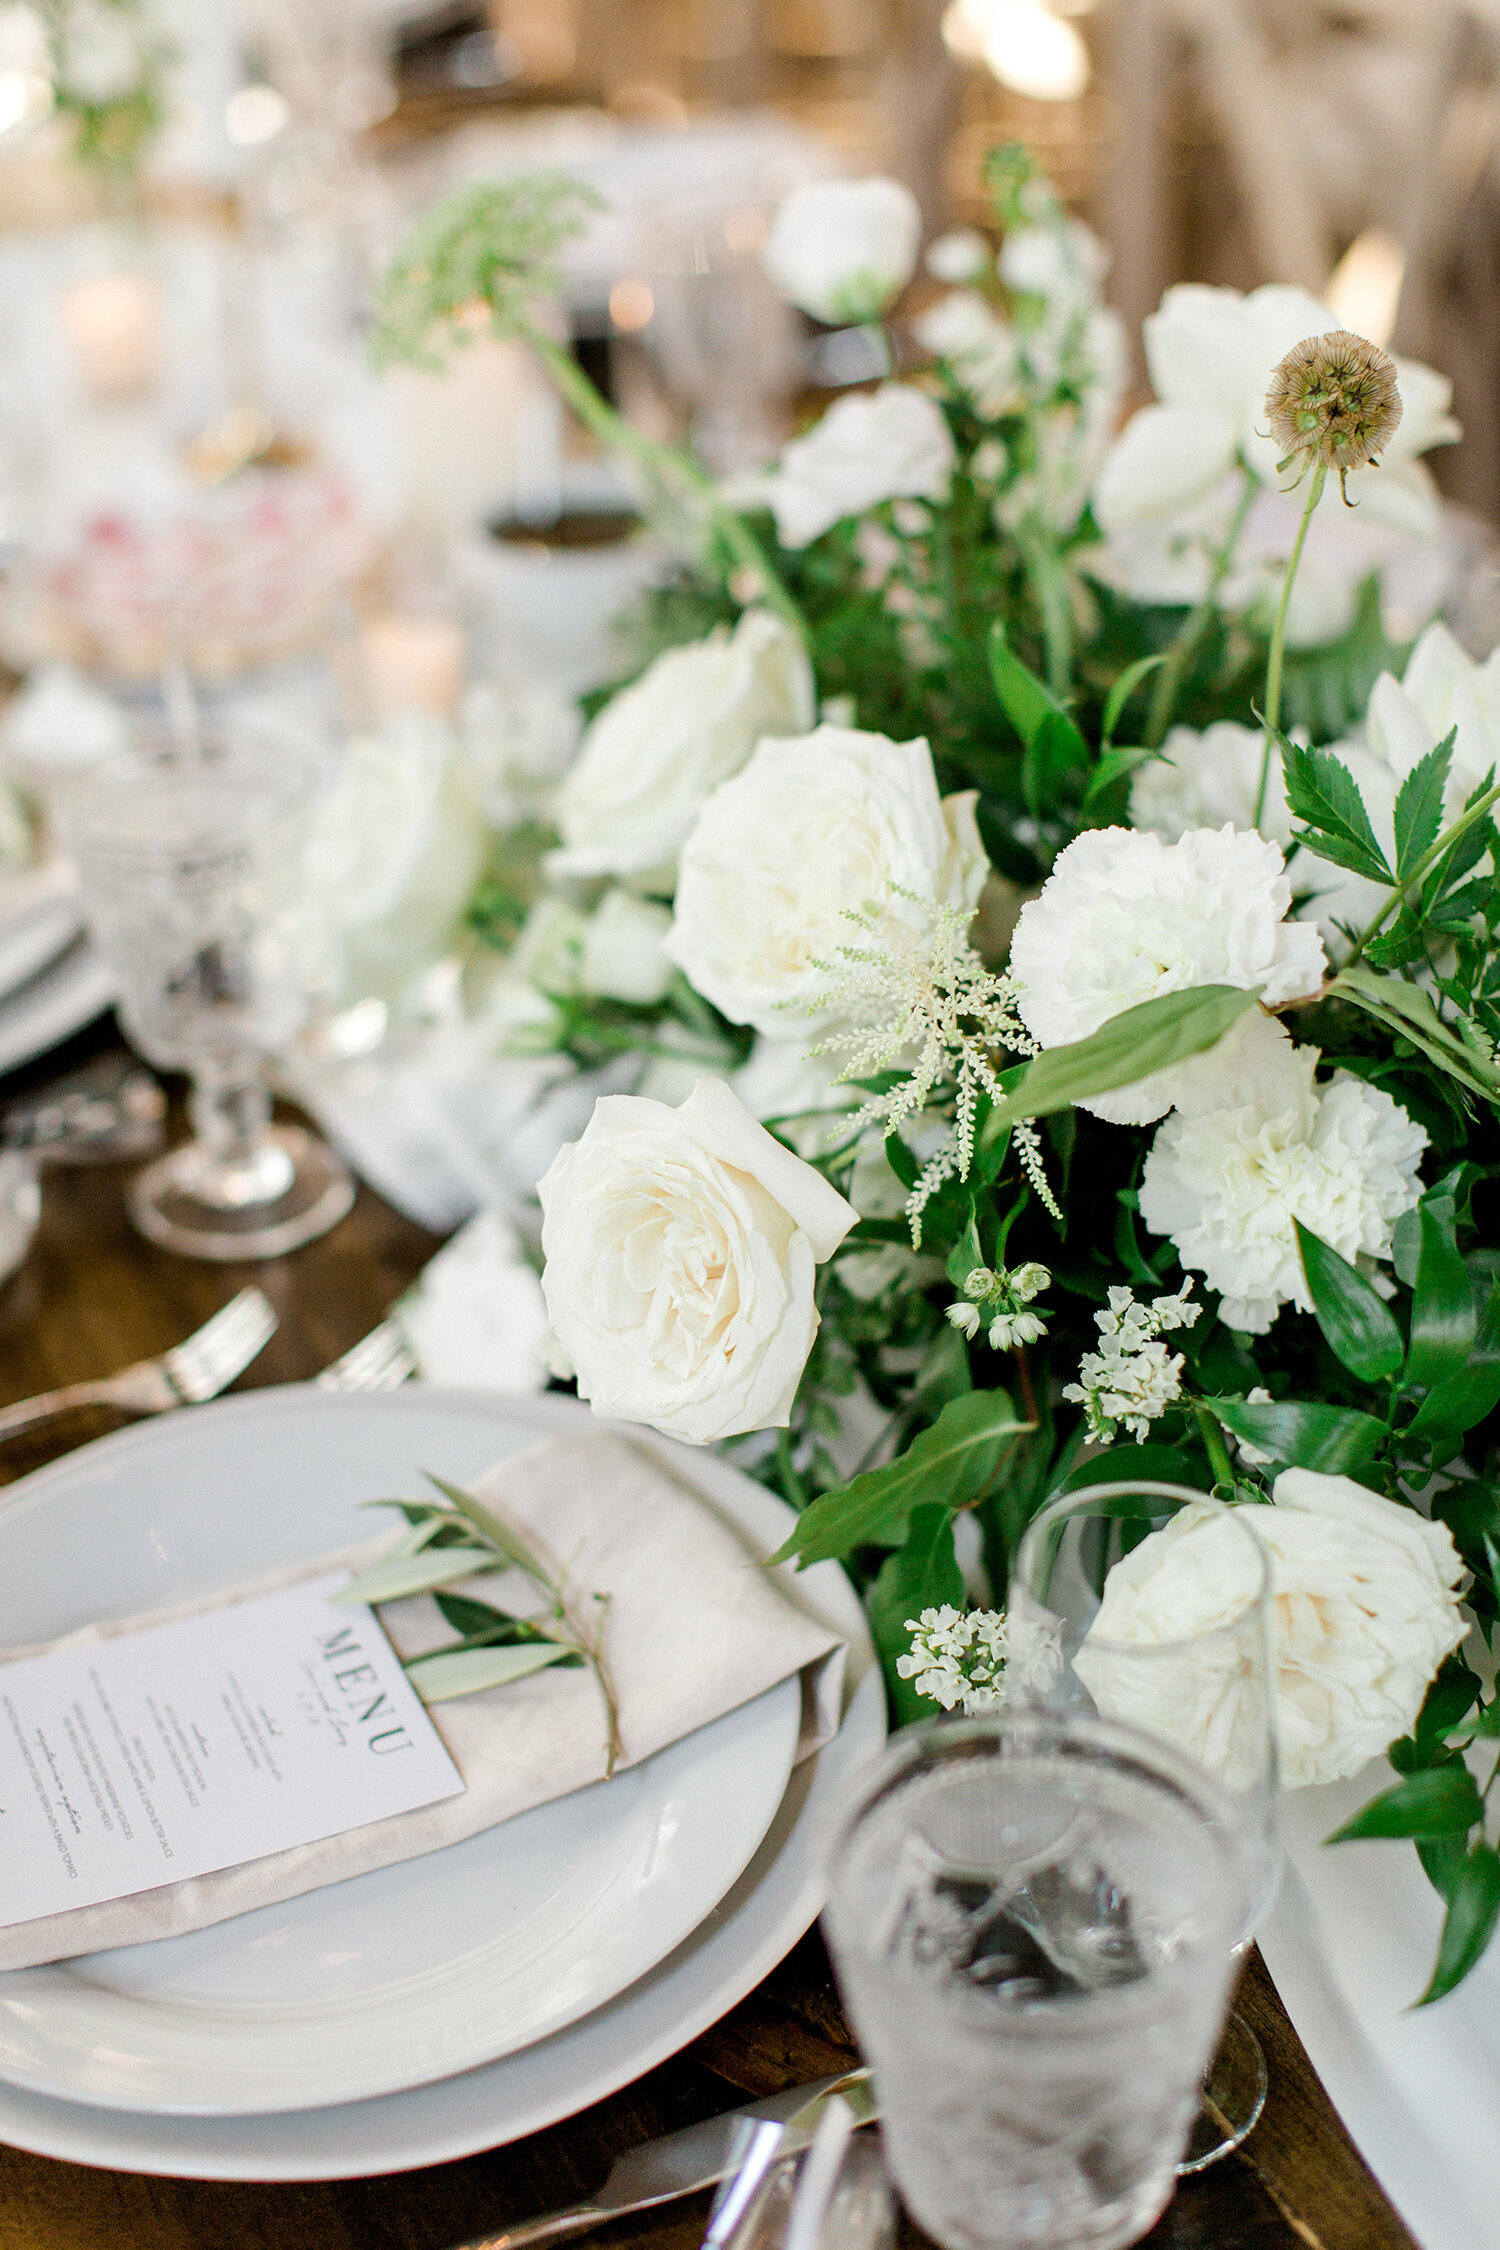 Cambium Farms Forever Wildfield Wedluxe Richelle Hunter 10